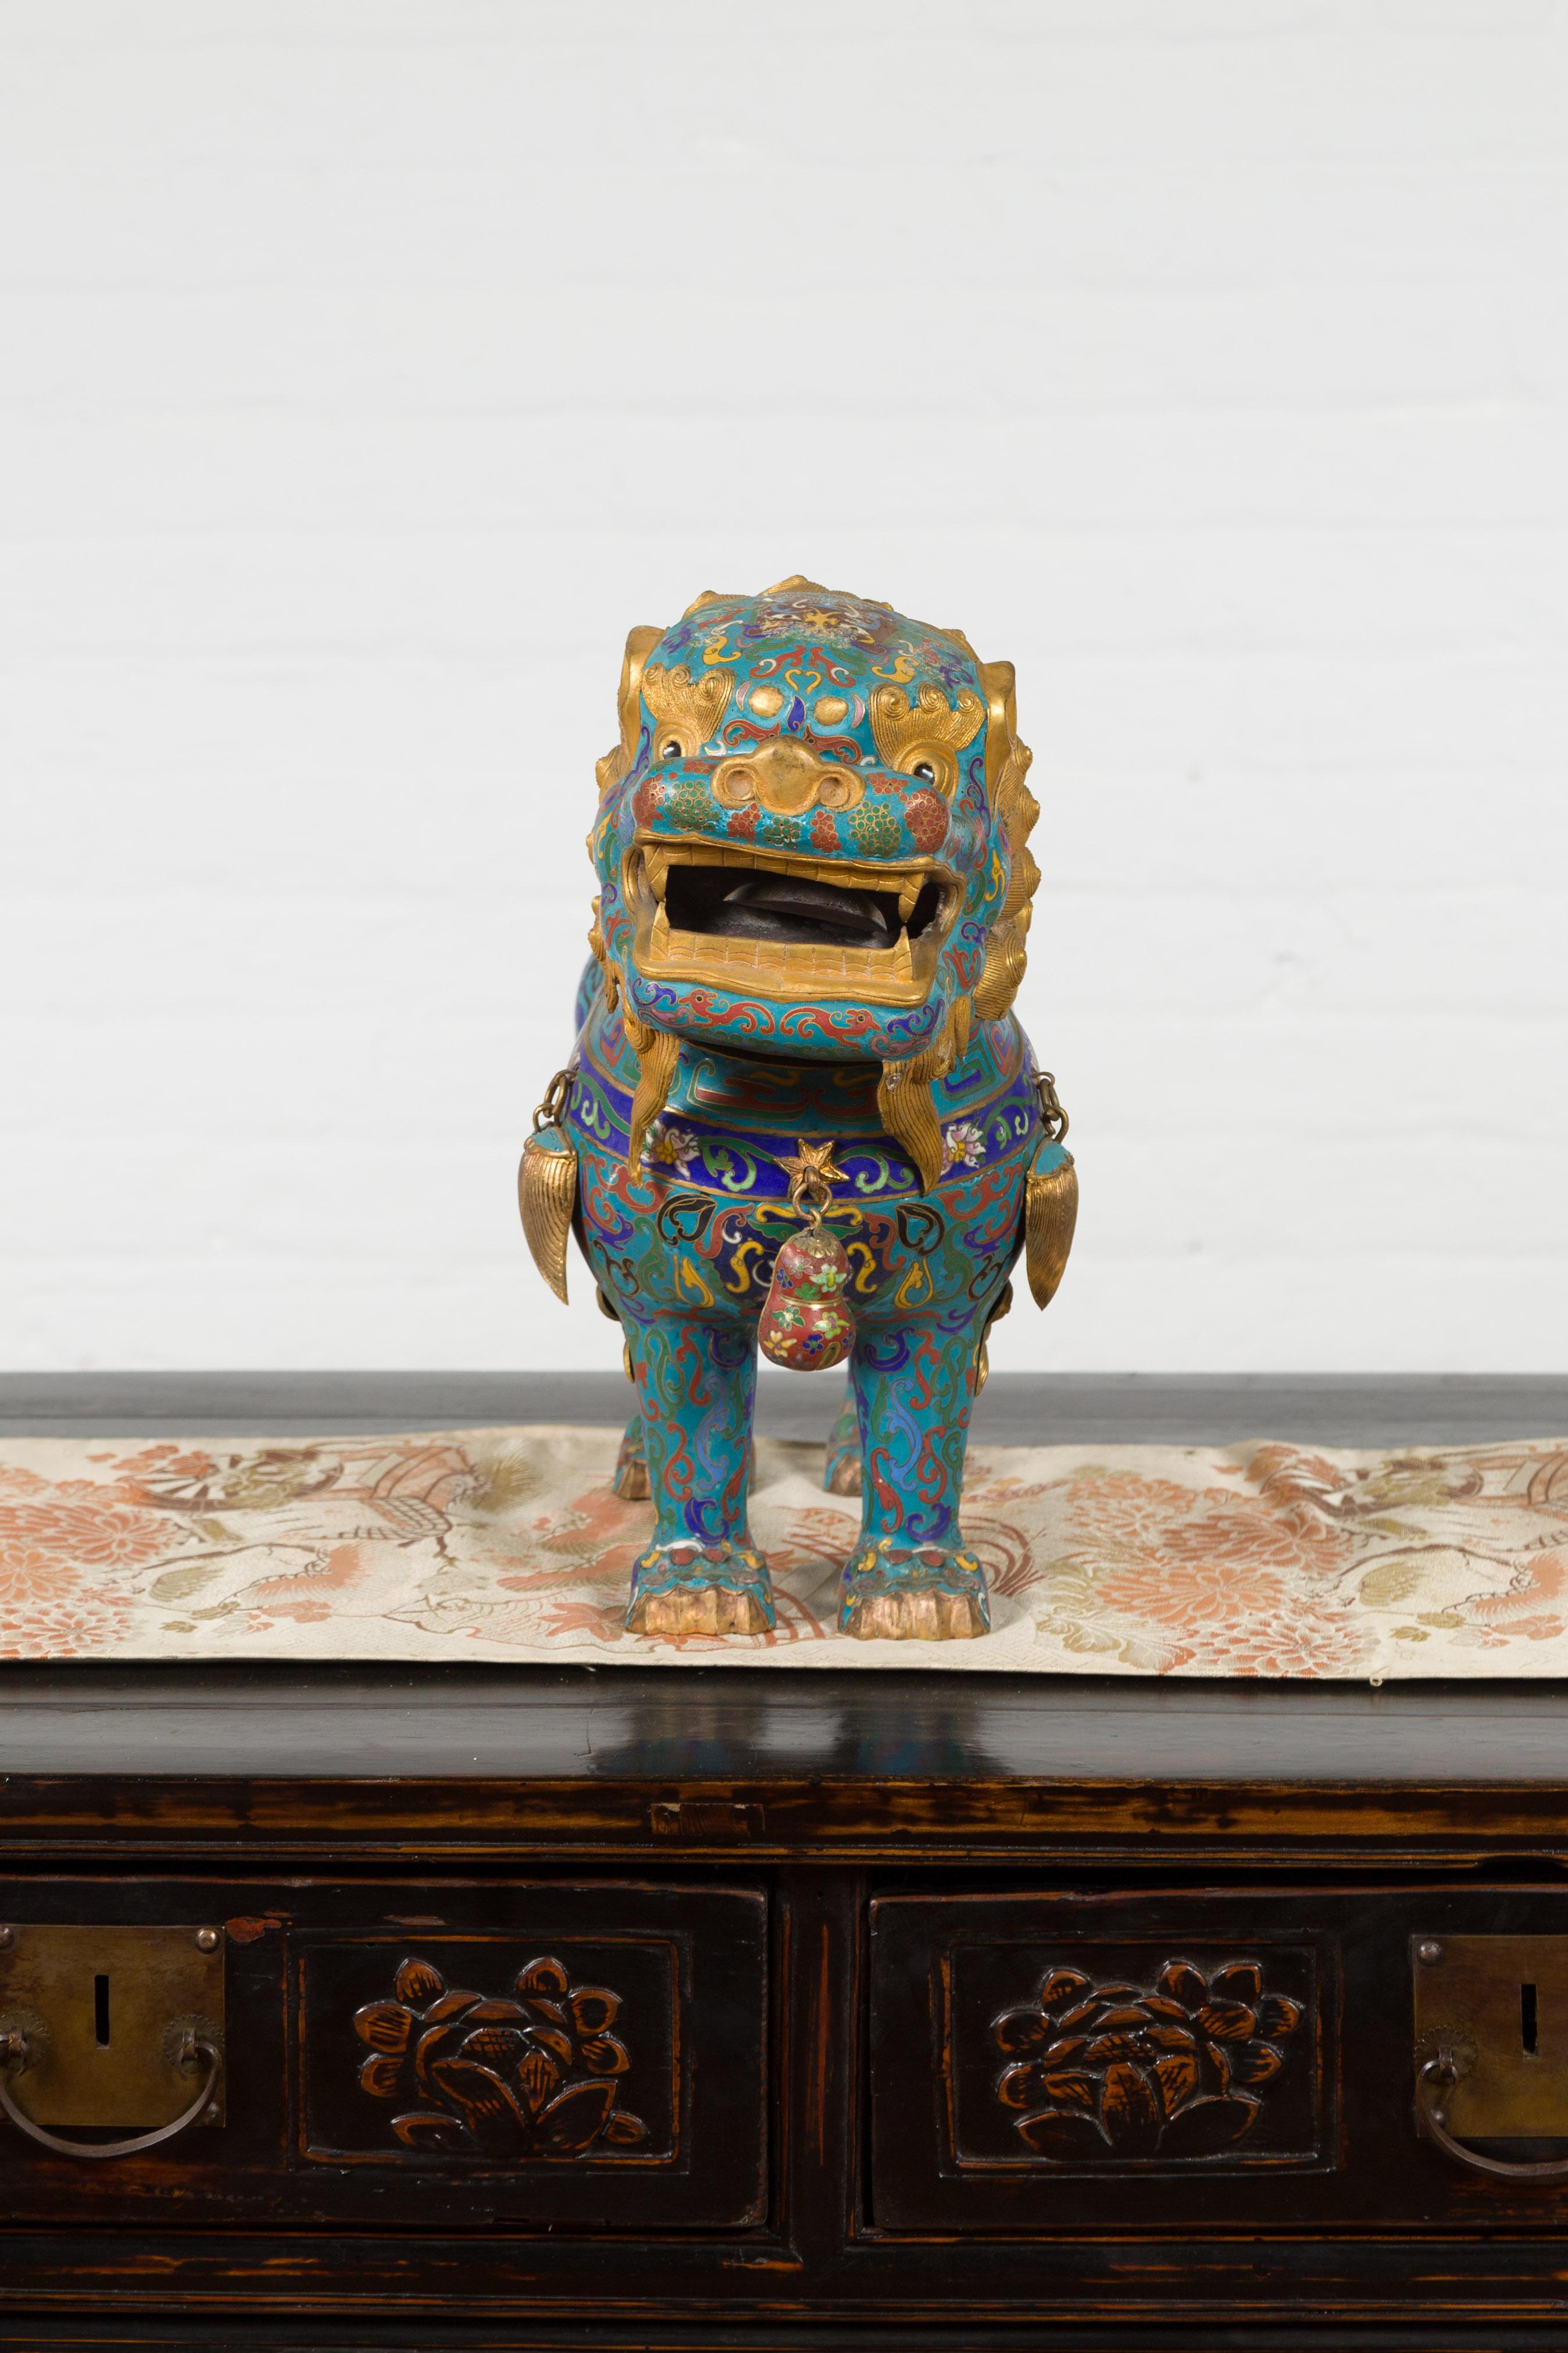 Chinese Vintage Metal Cloisonné Foo Dog Guardian Lion with Teal and Golden Tones 7